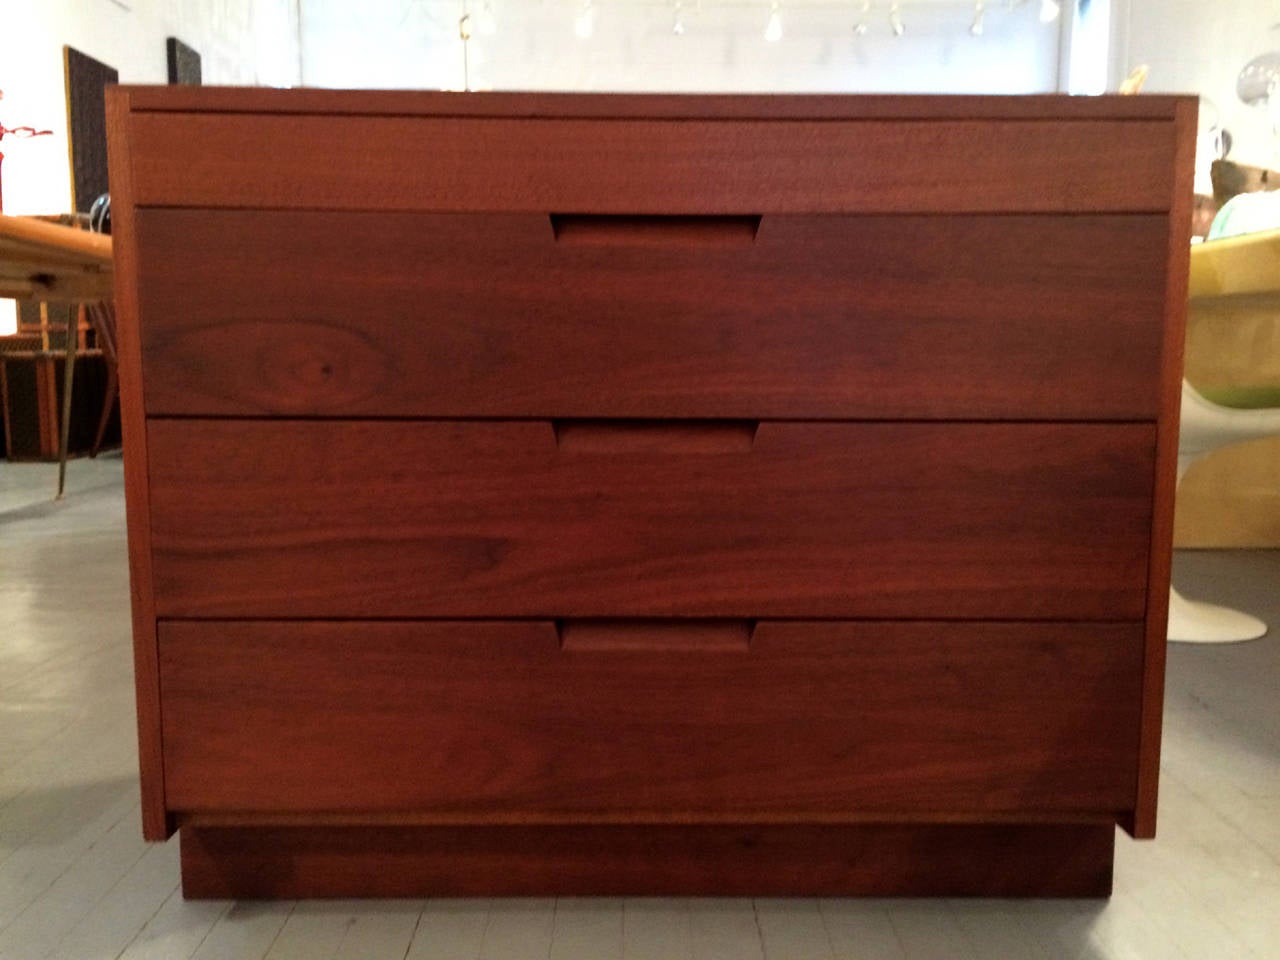 An early pair of chest of drawers or commode hand crafted by George Nakashima in his New Hope studio in 1955. They were made from American walnut and each features four drawers with carved recessed pulls and plank feet. They are elegant classic